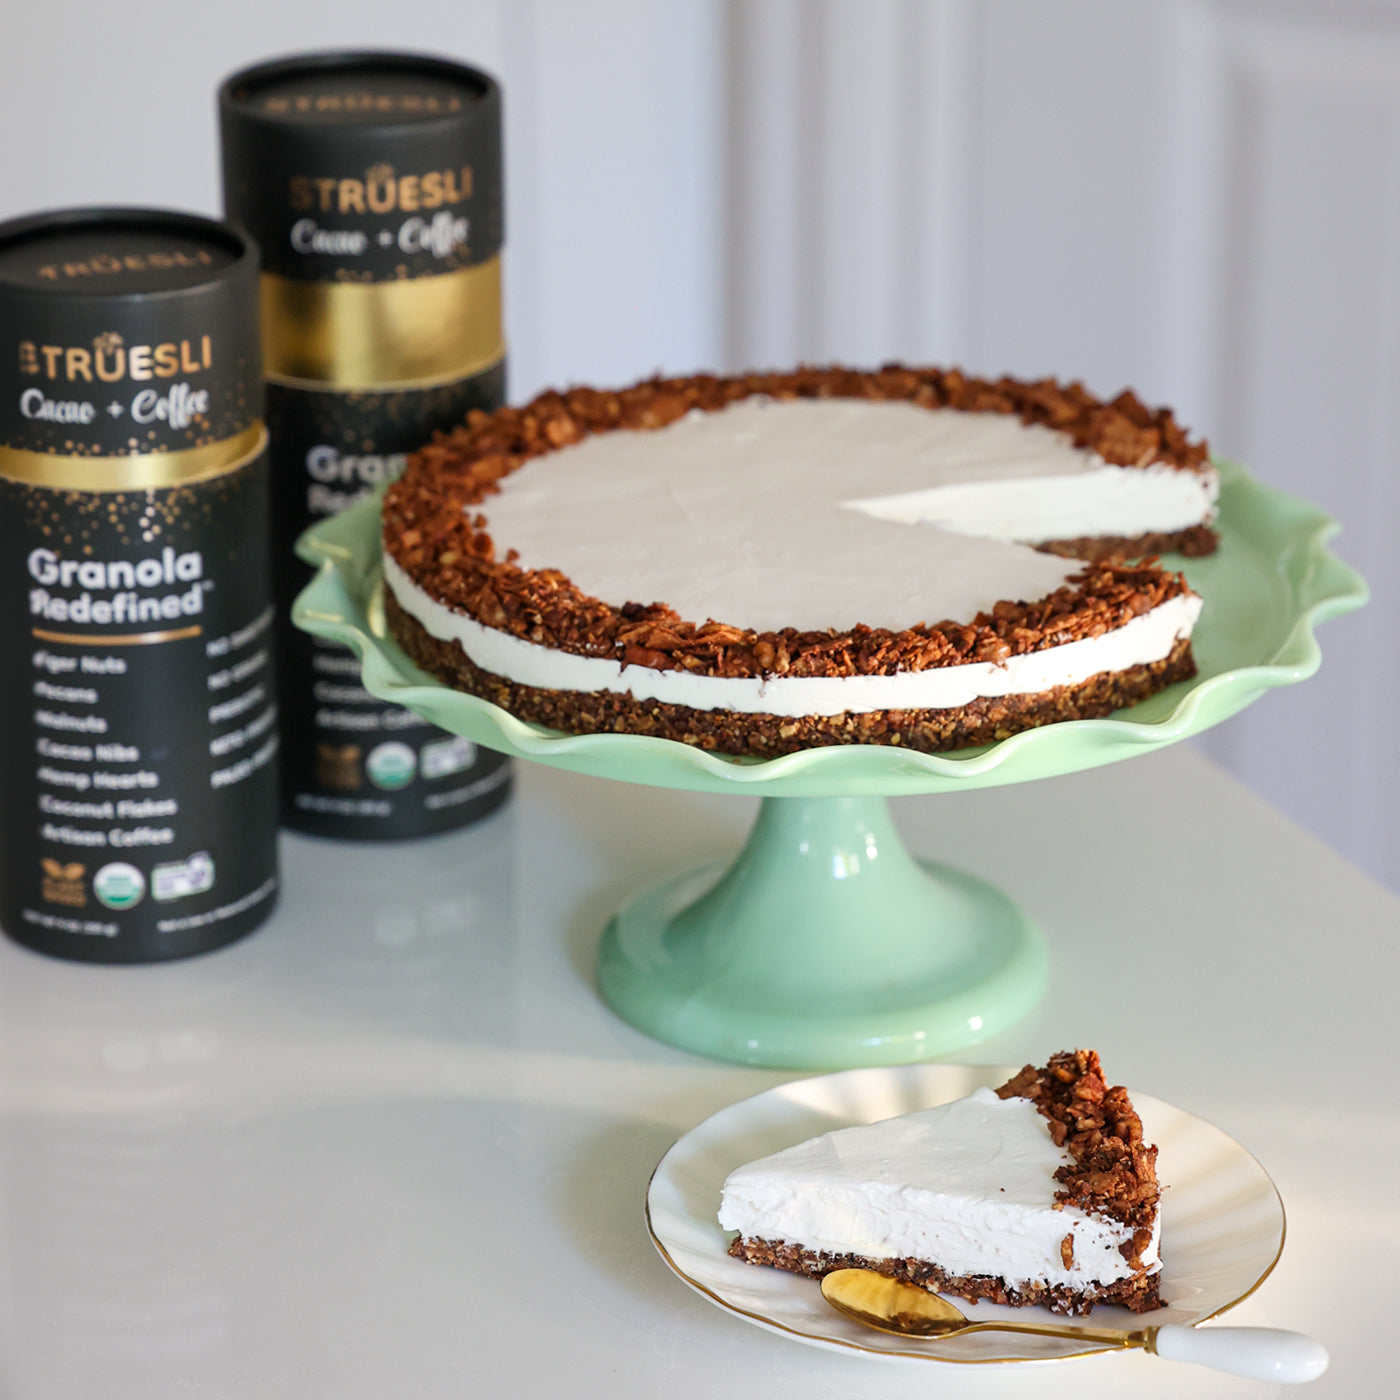 Vegan granola cheesecake on a cake pedestal with containers of Struesli Cacao + Coffee